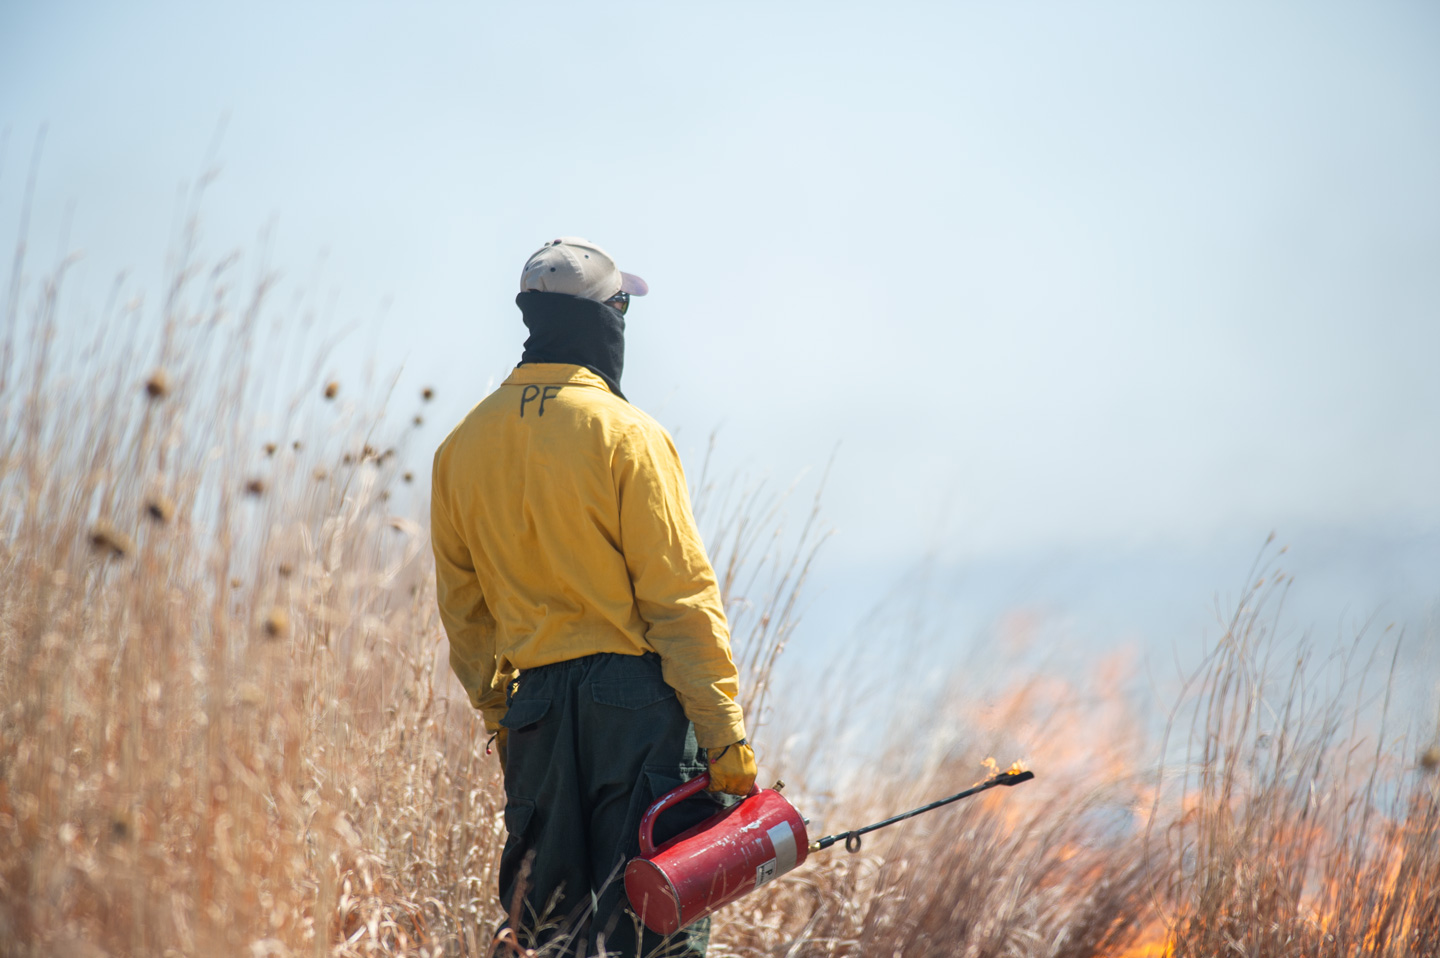 Read More: Prescribed burns set for Cedar and Knox county OFW sites